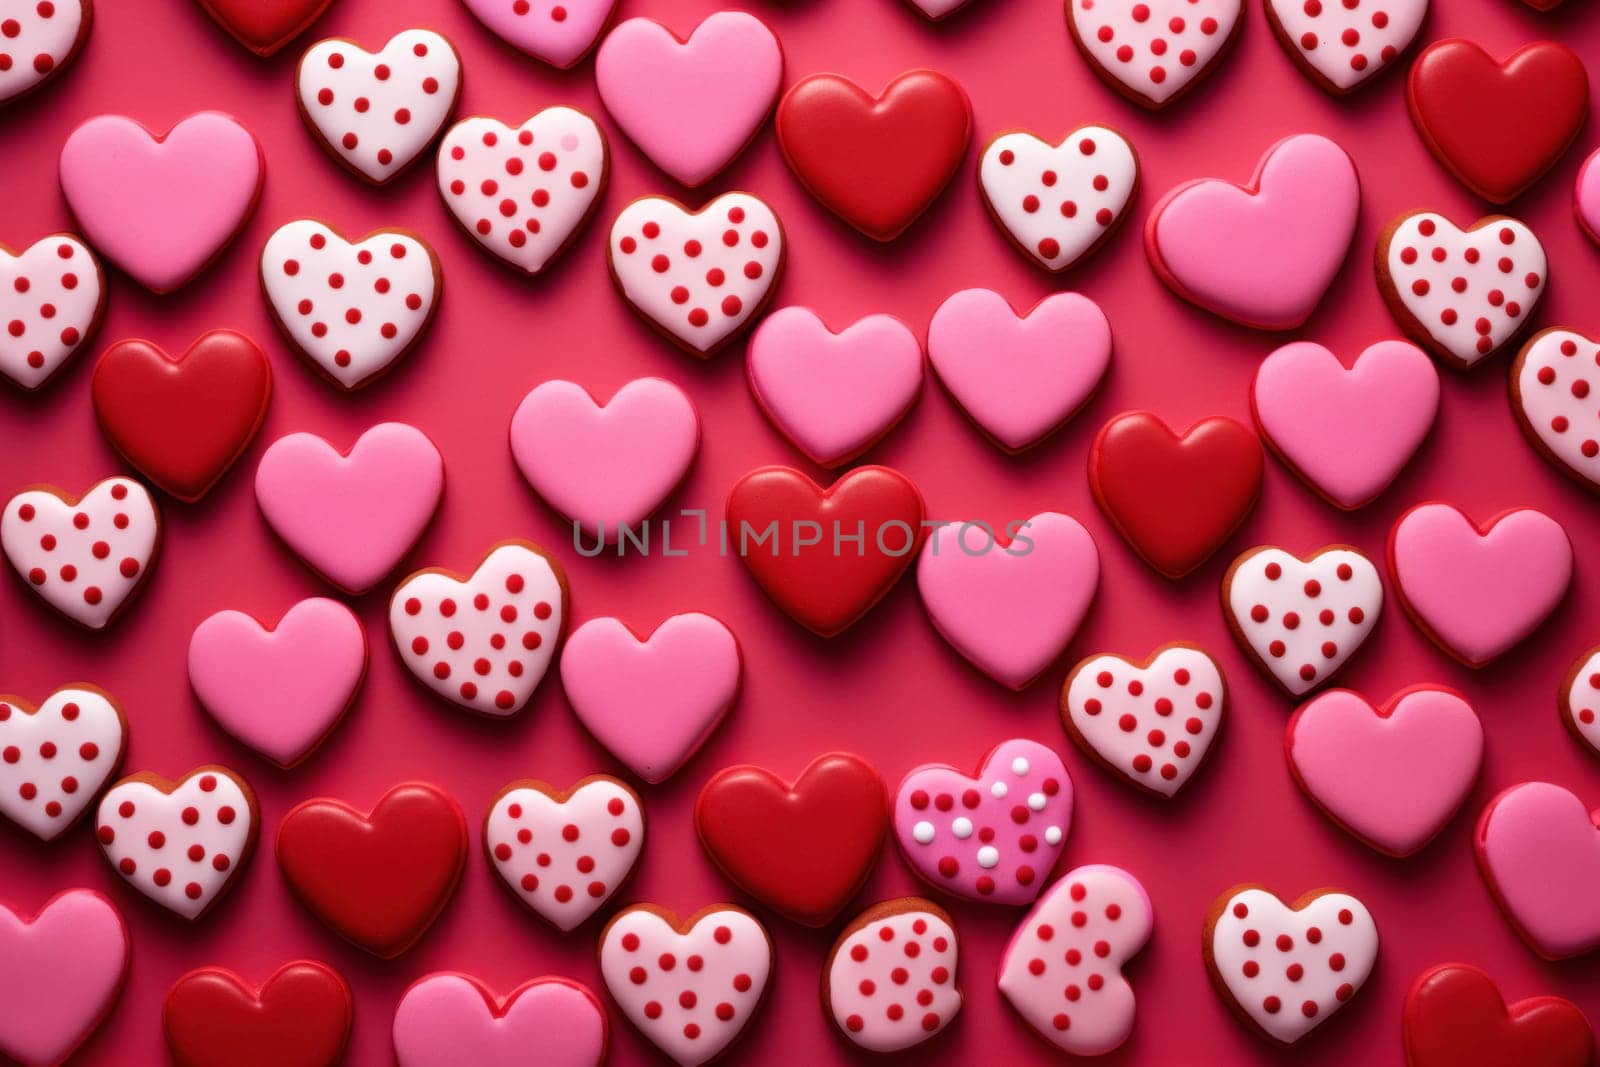 Collection of heart-shaped cookies with various pink patterns on a striking red background, perfect for Valentine's celebrations.